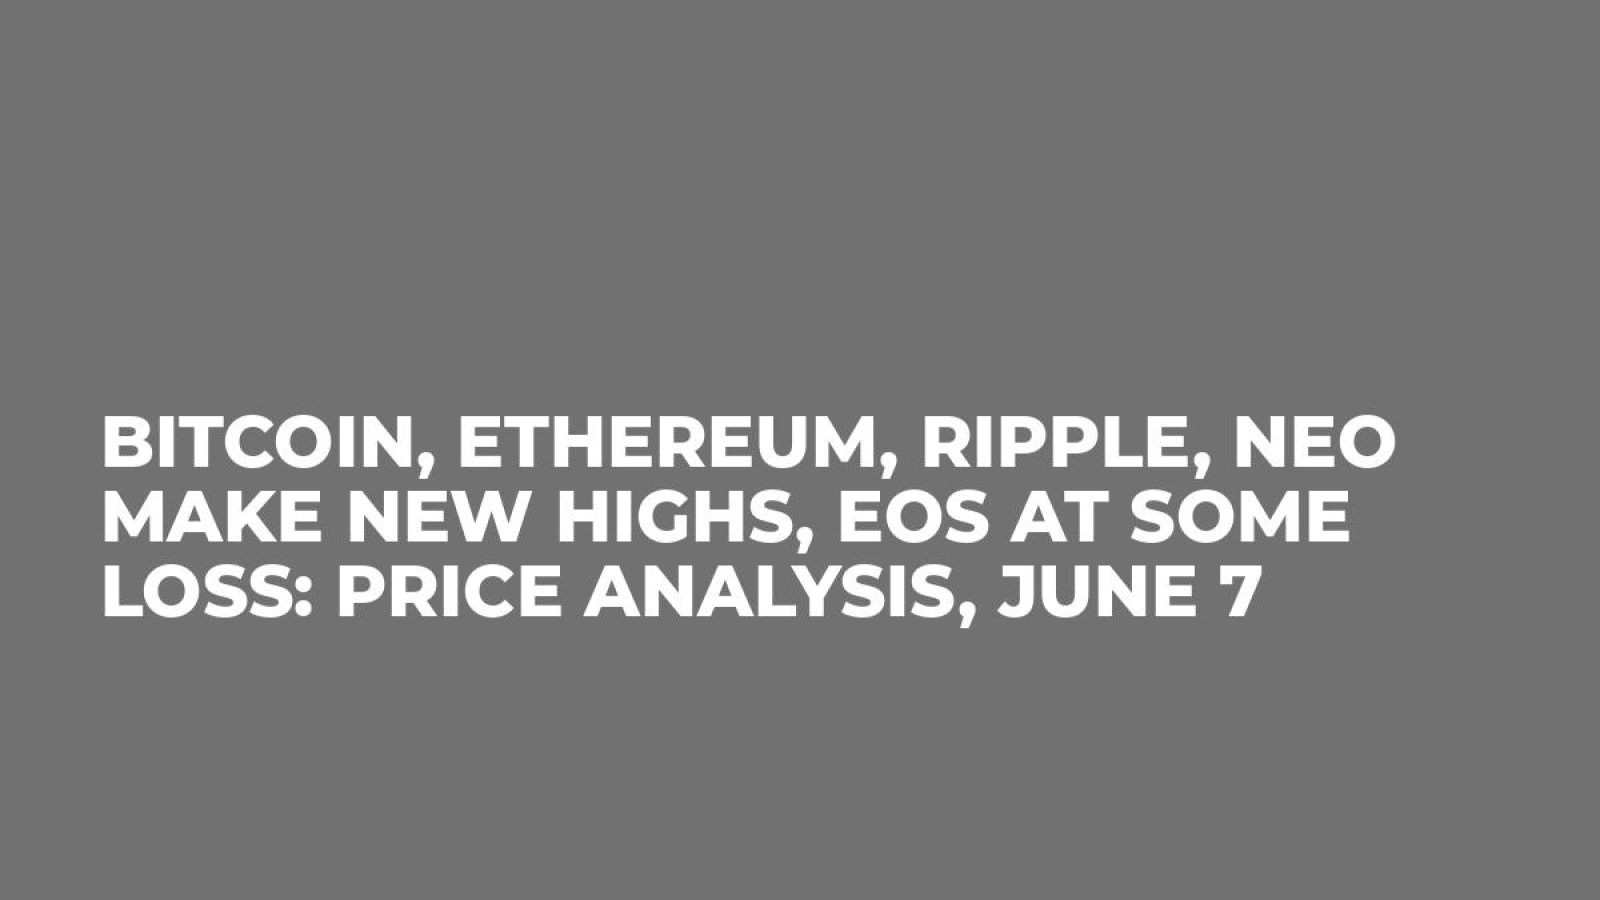 Bitcoin, Ethereum, Ripple, NEO Make New Highs, EOS at Some Loss: Price Analysis, June 7